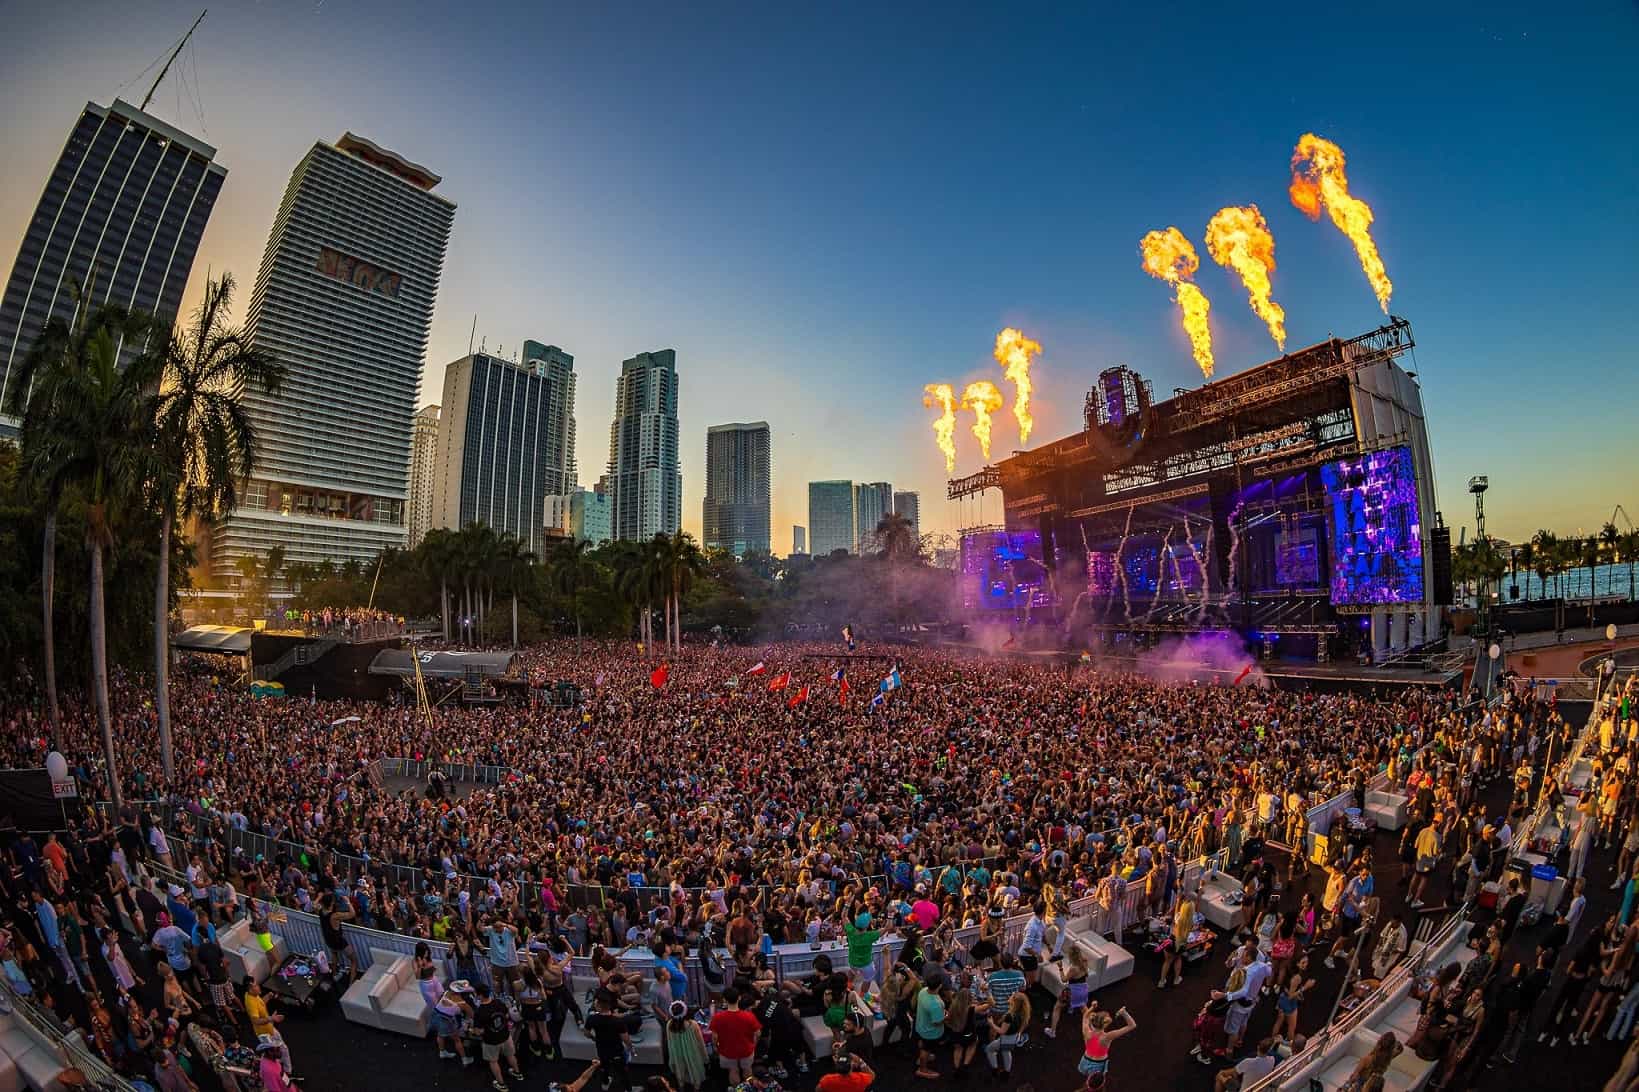 Ultra Music Festival designer teases “the craziest Megastructure design created” for 2023